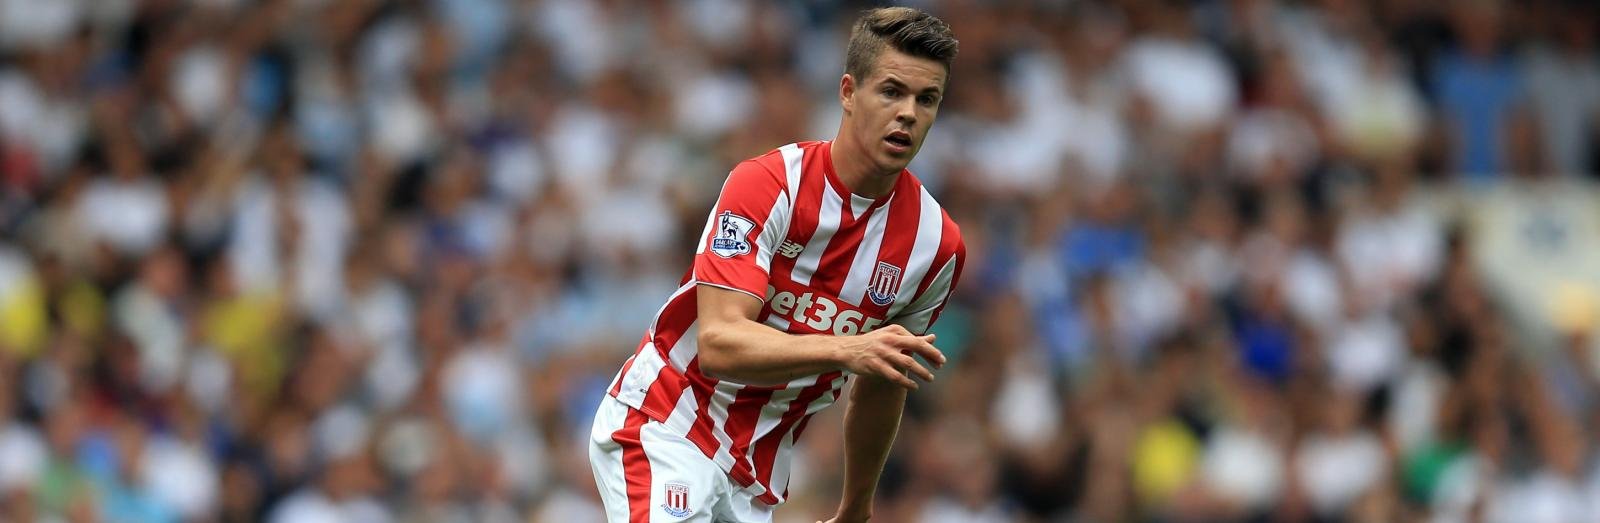 Chelsea midfielder set for PSV switch after Stoke City’s £18.2m deal